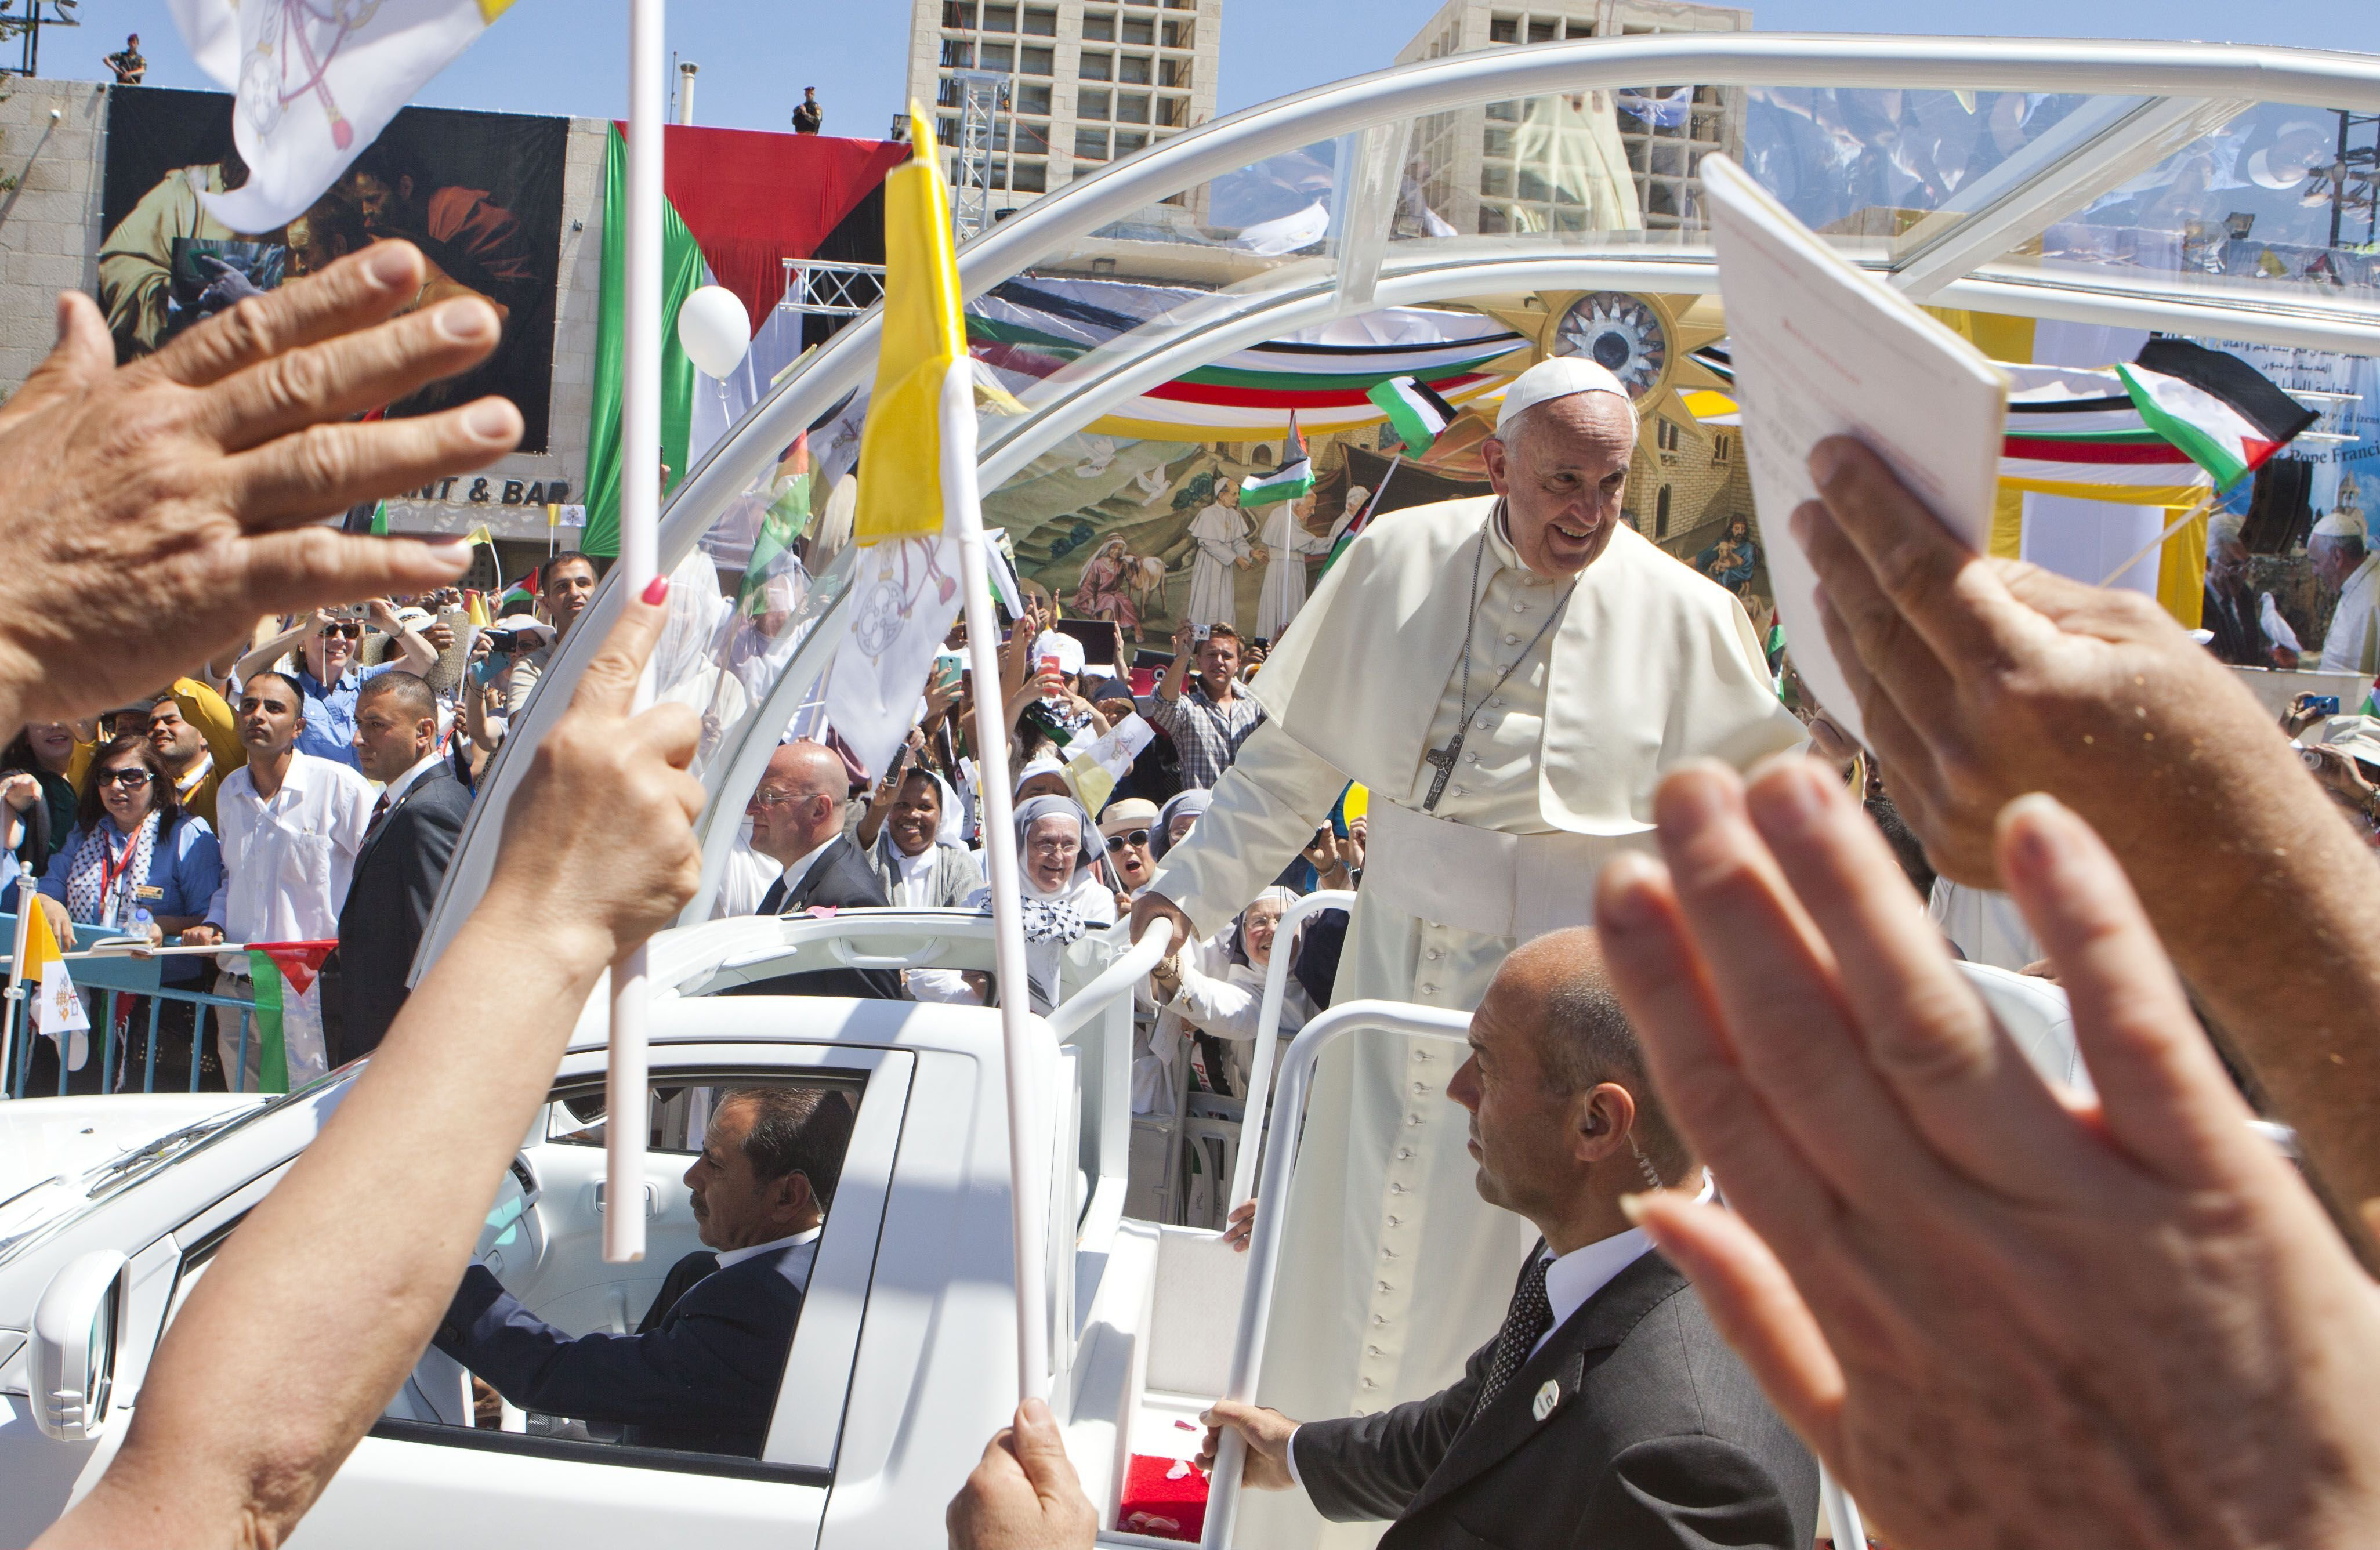 Pope Francis arrived in Bethlehem's Manger Square in an open vehicle where over 10,000 Christian pilgrims were packed on May 25, 2014 in the West Bank. (Heidi Levine—SIPA)